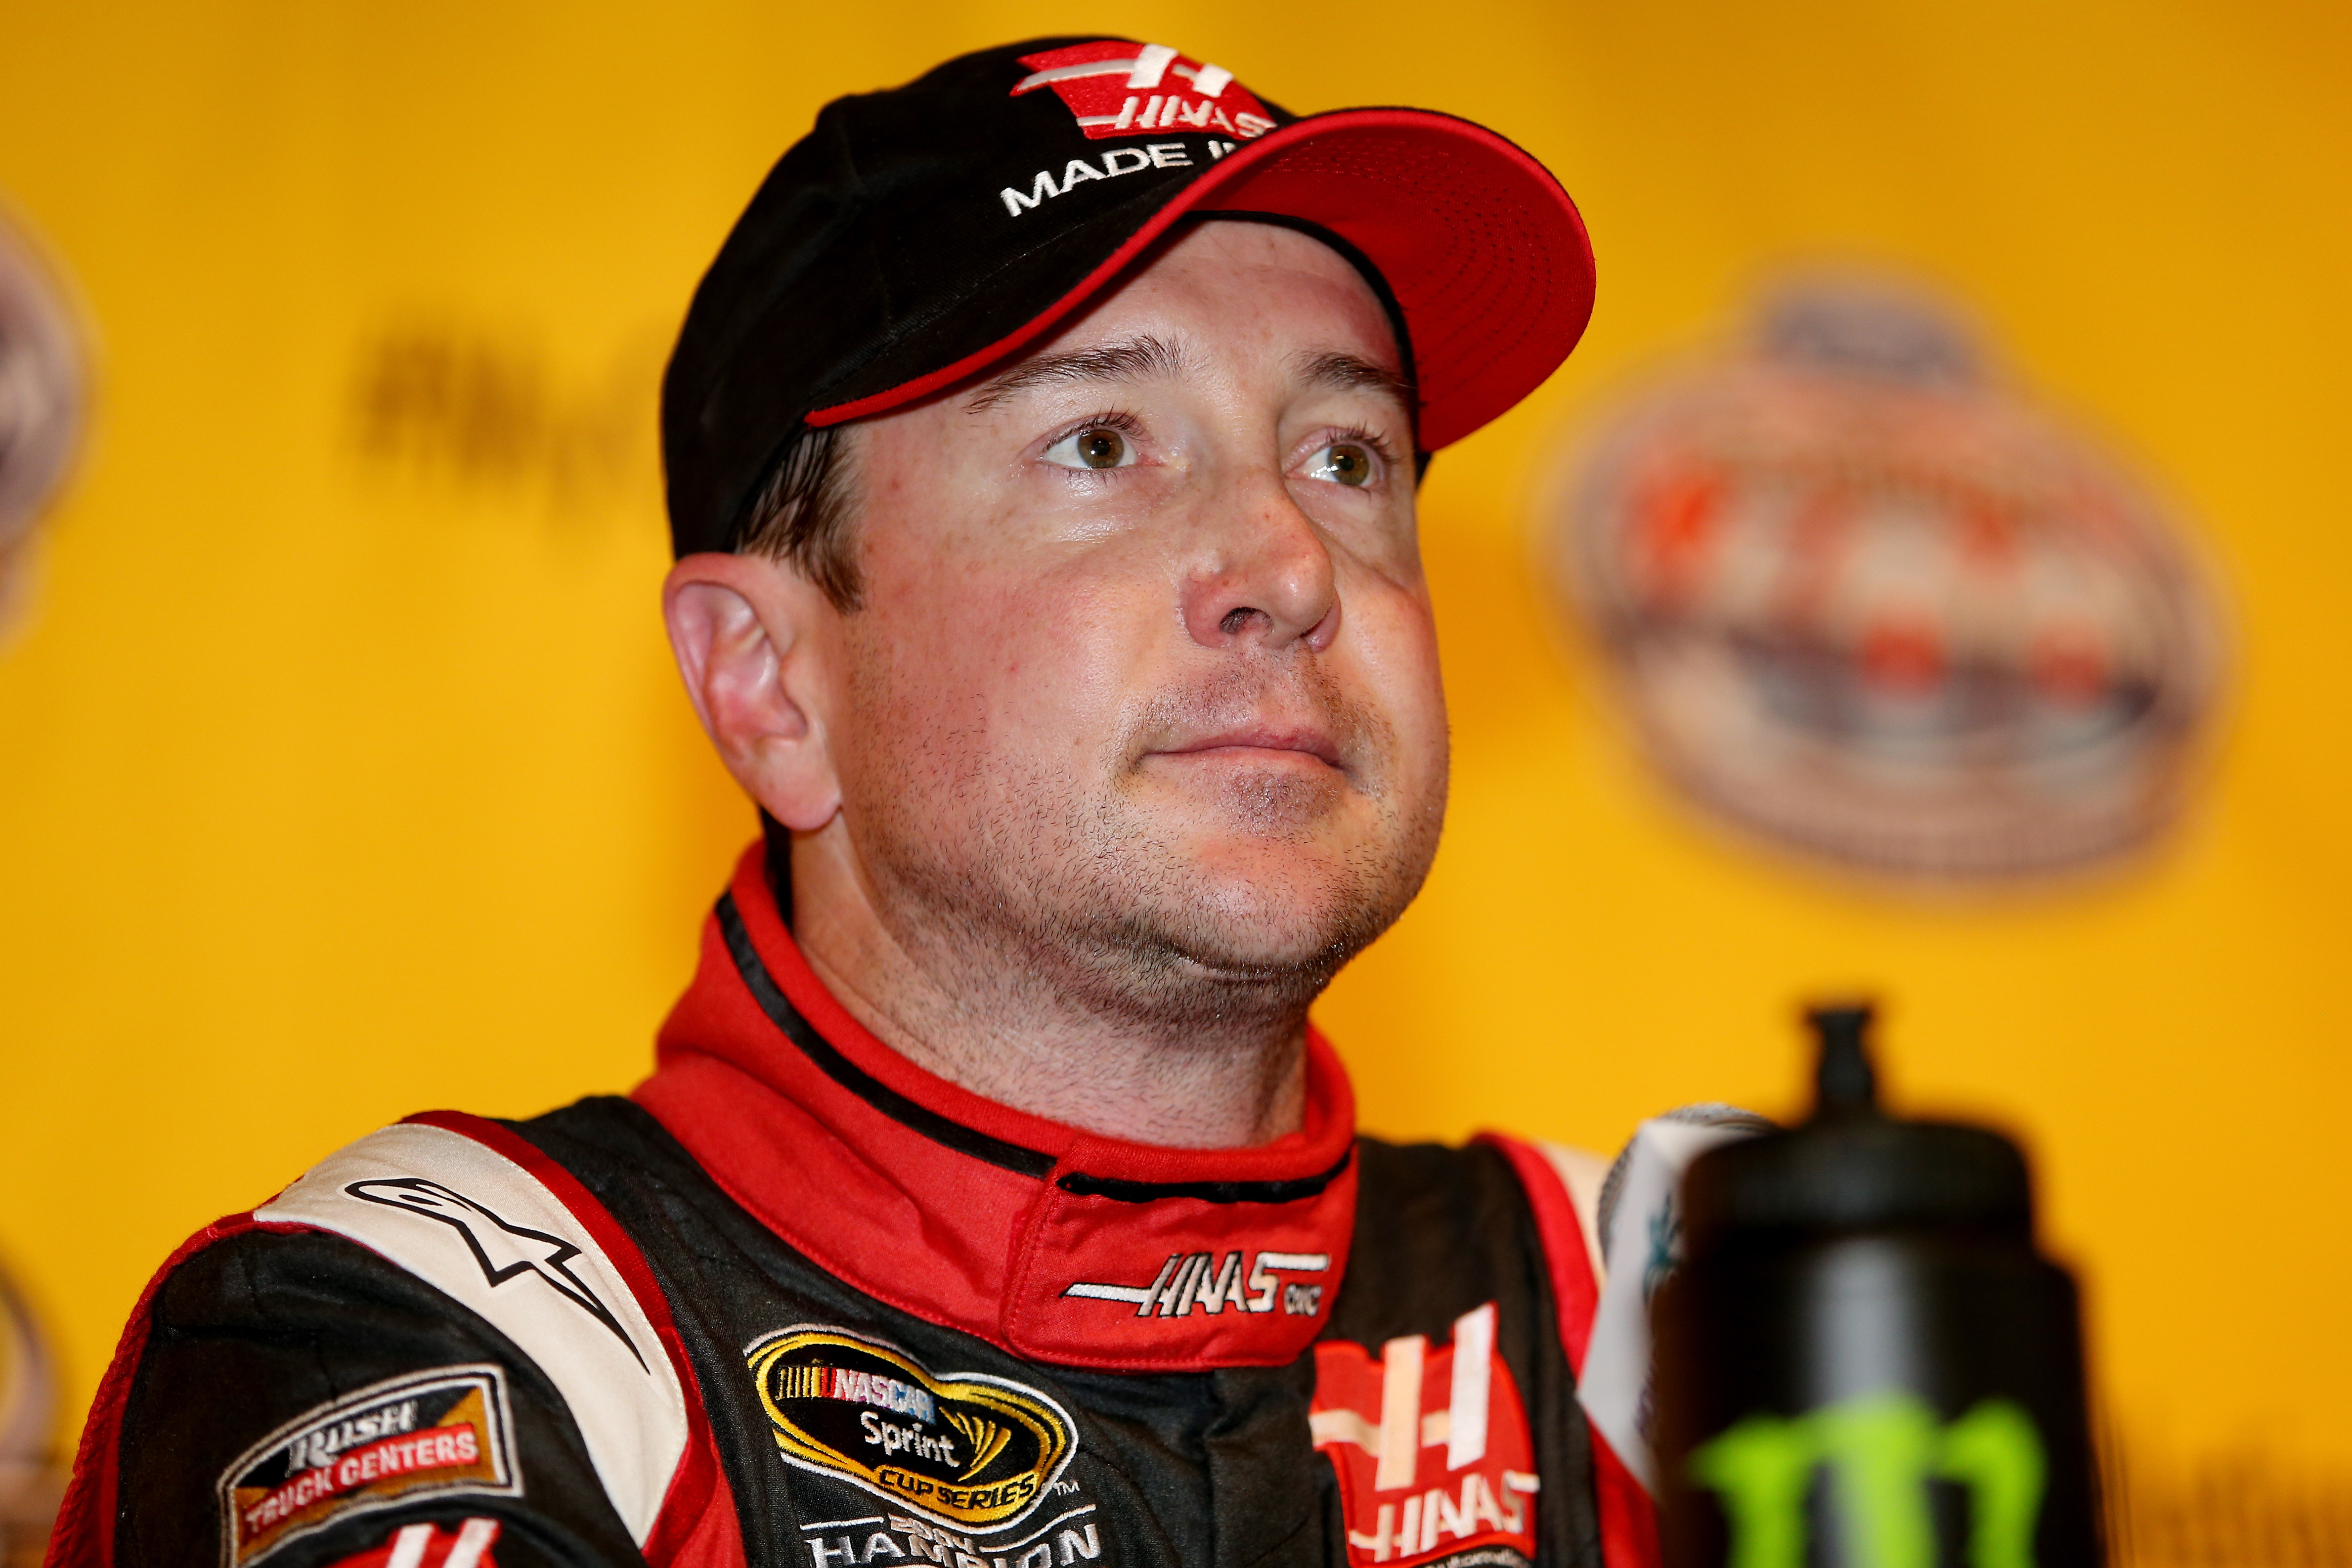 Kurt Busch speaks to the media after qualifying for the NASCAR Sprint Cup Series Ford EcoBoost 400 in Homestead, Fla. on Nov. 14, 2014. (Todd Warshaw—Getty Images)